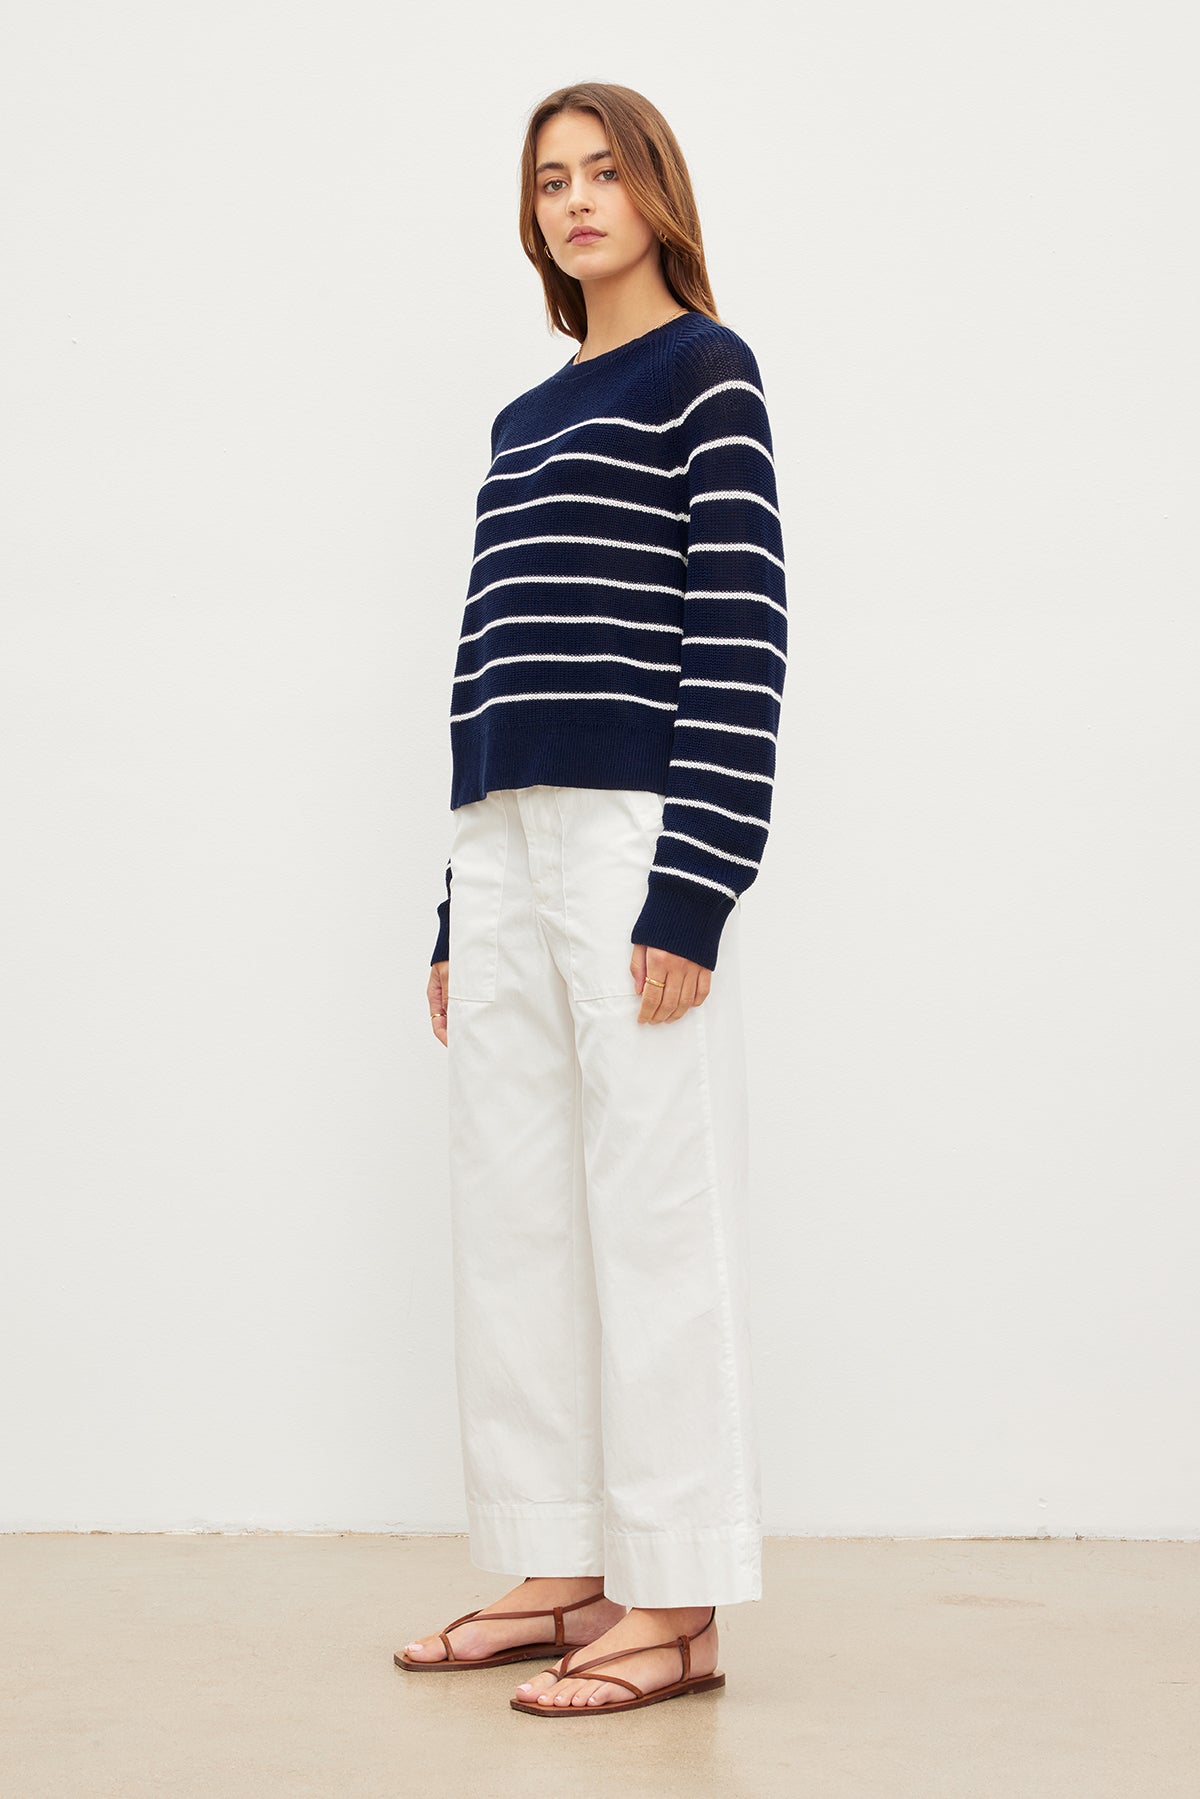 The model is wearing a CHAYSE STRIPED CREW NECK SWEATER by Velvet by Graham & Spencer with a relaxed silhouette and white wide leg pants.-35955537281217